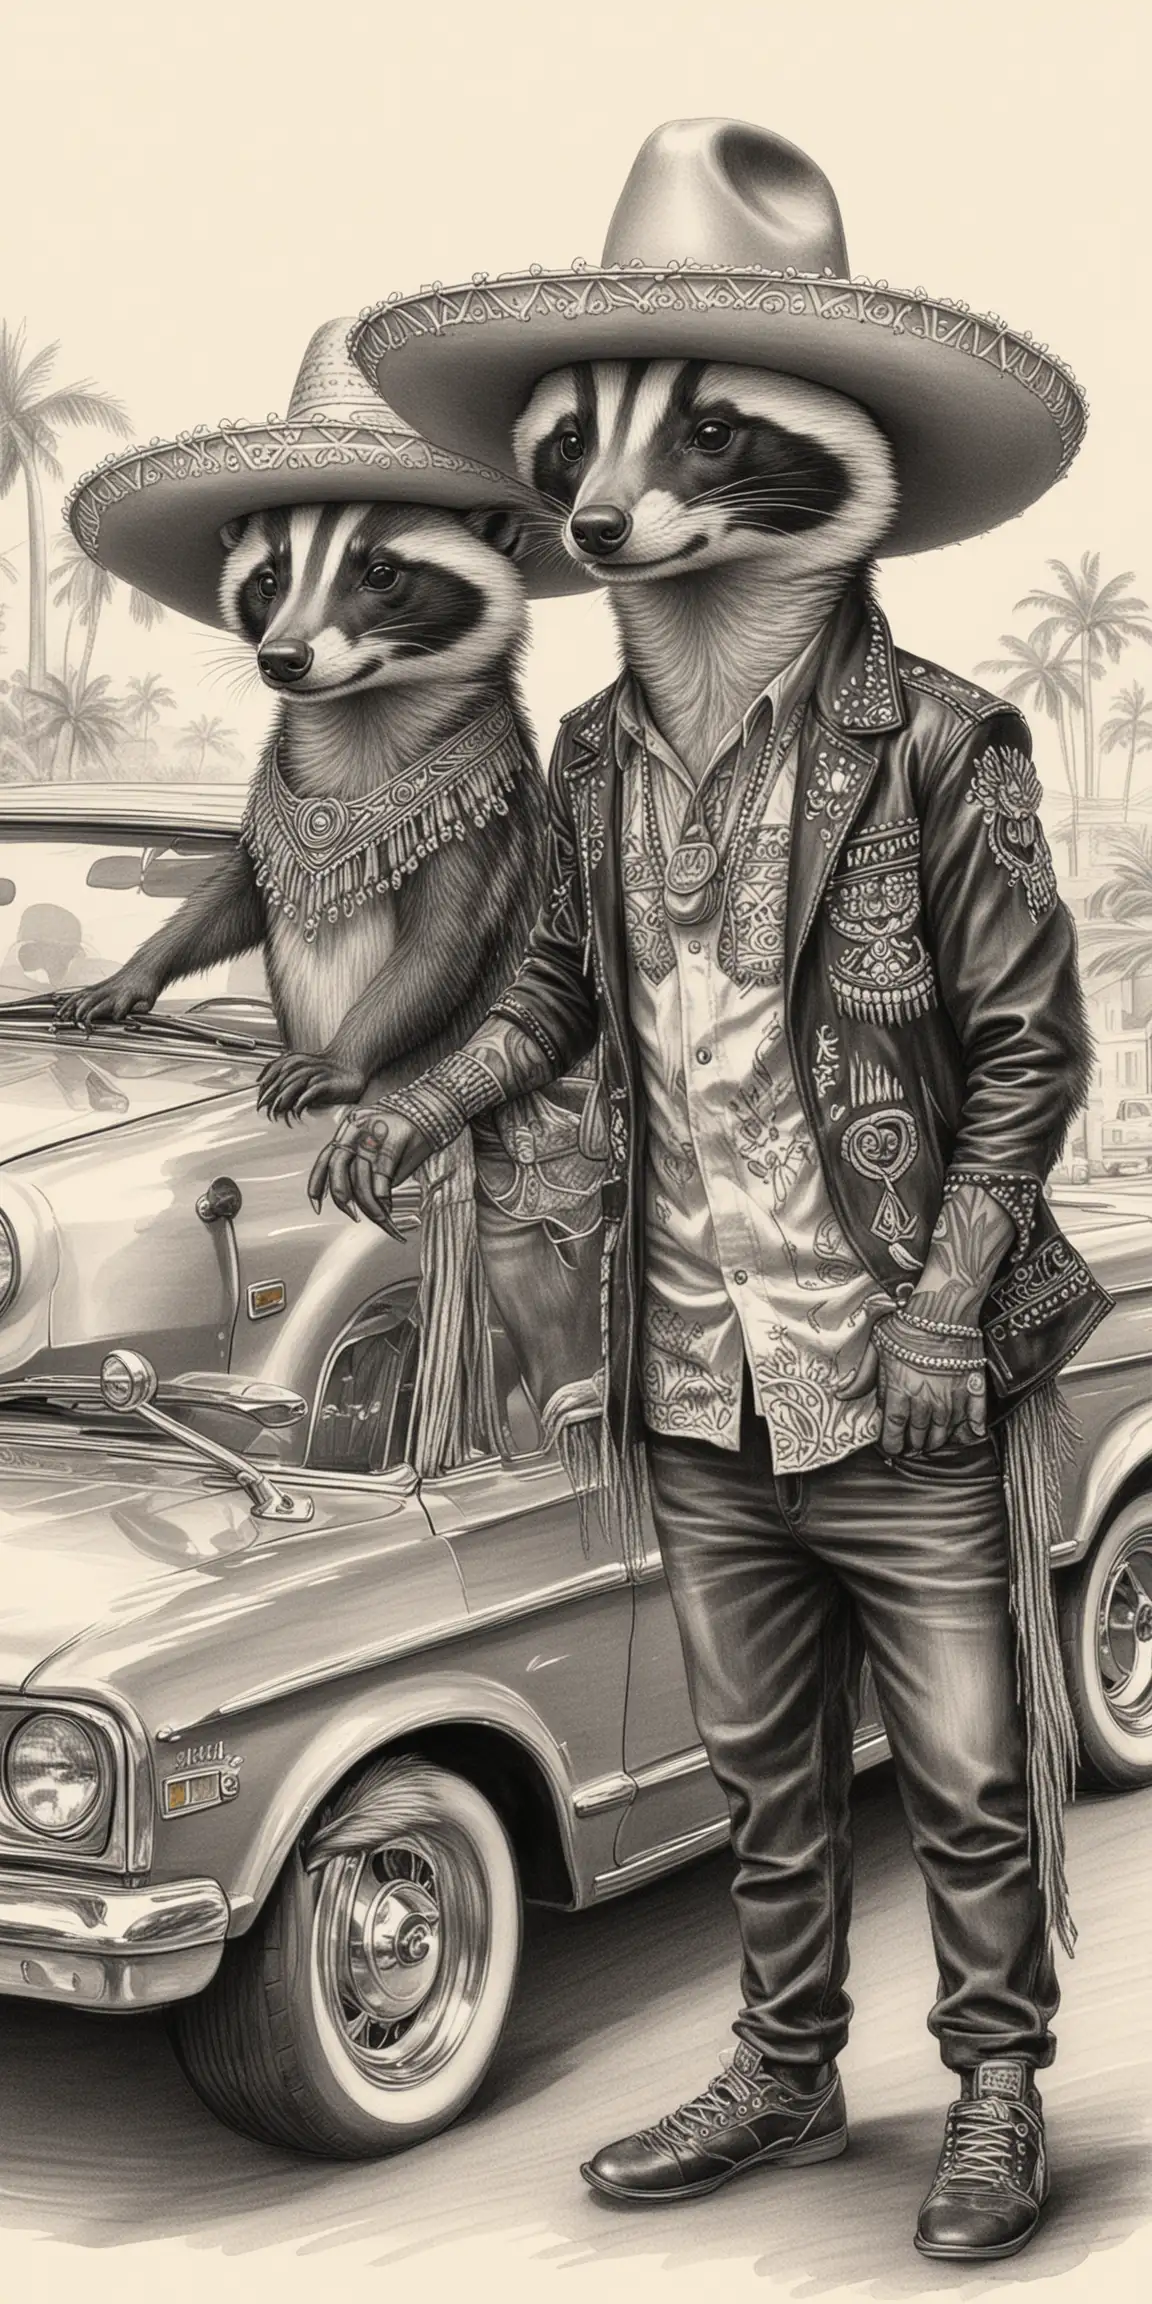  a drawing of cool mexican badger wearing a sombrero standing next to his mexican badger girlfriend  by a lowrider car